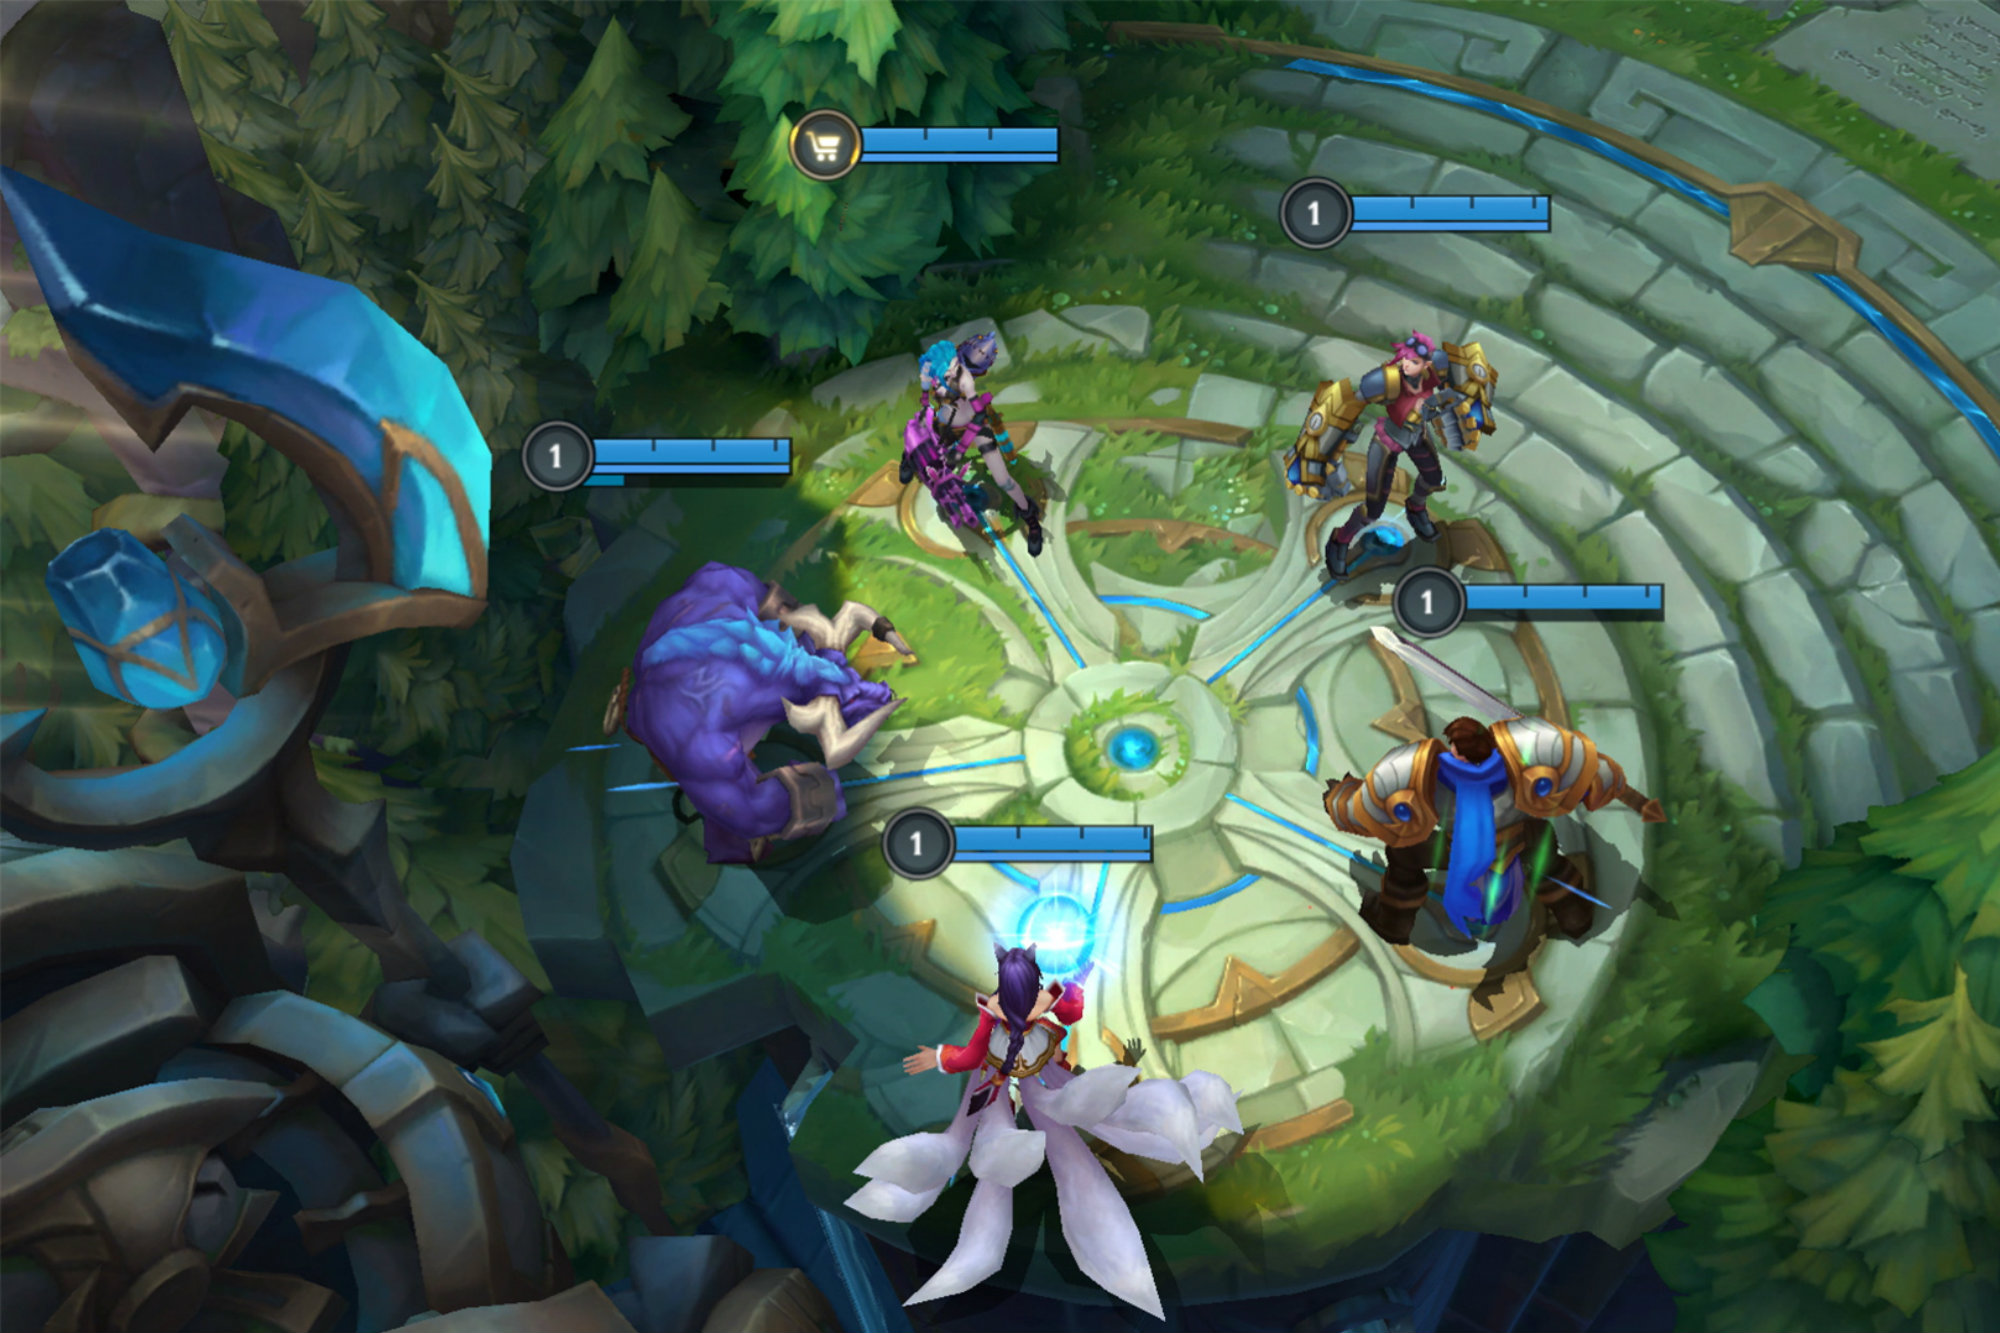 League of Legends the world's 'most played video game' - CNET